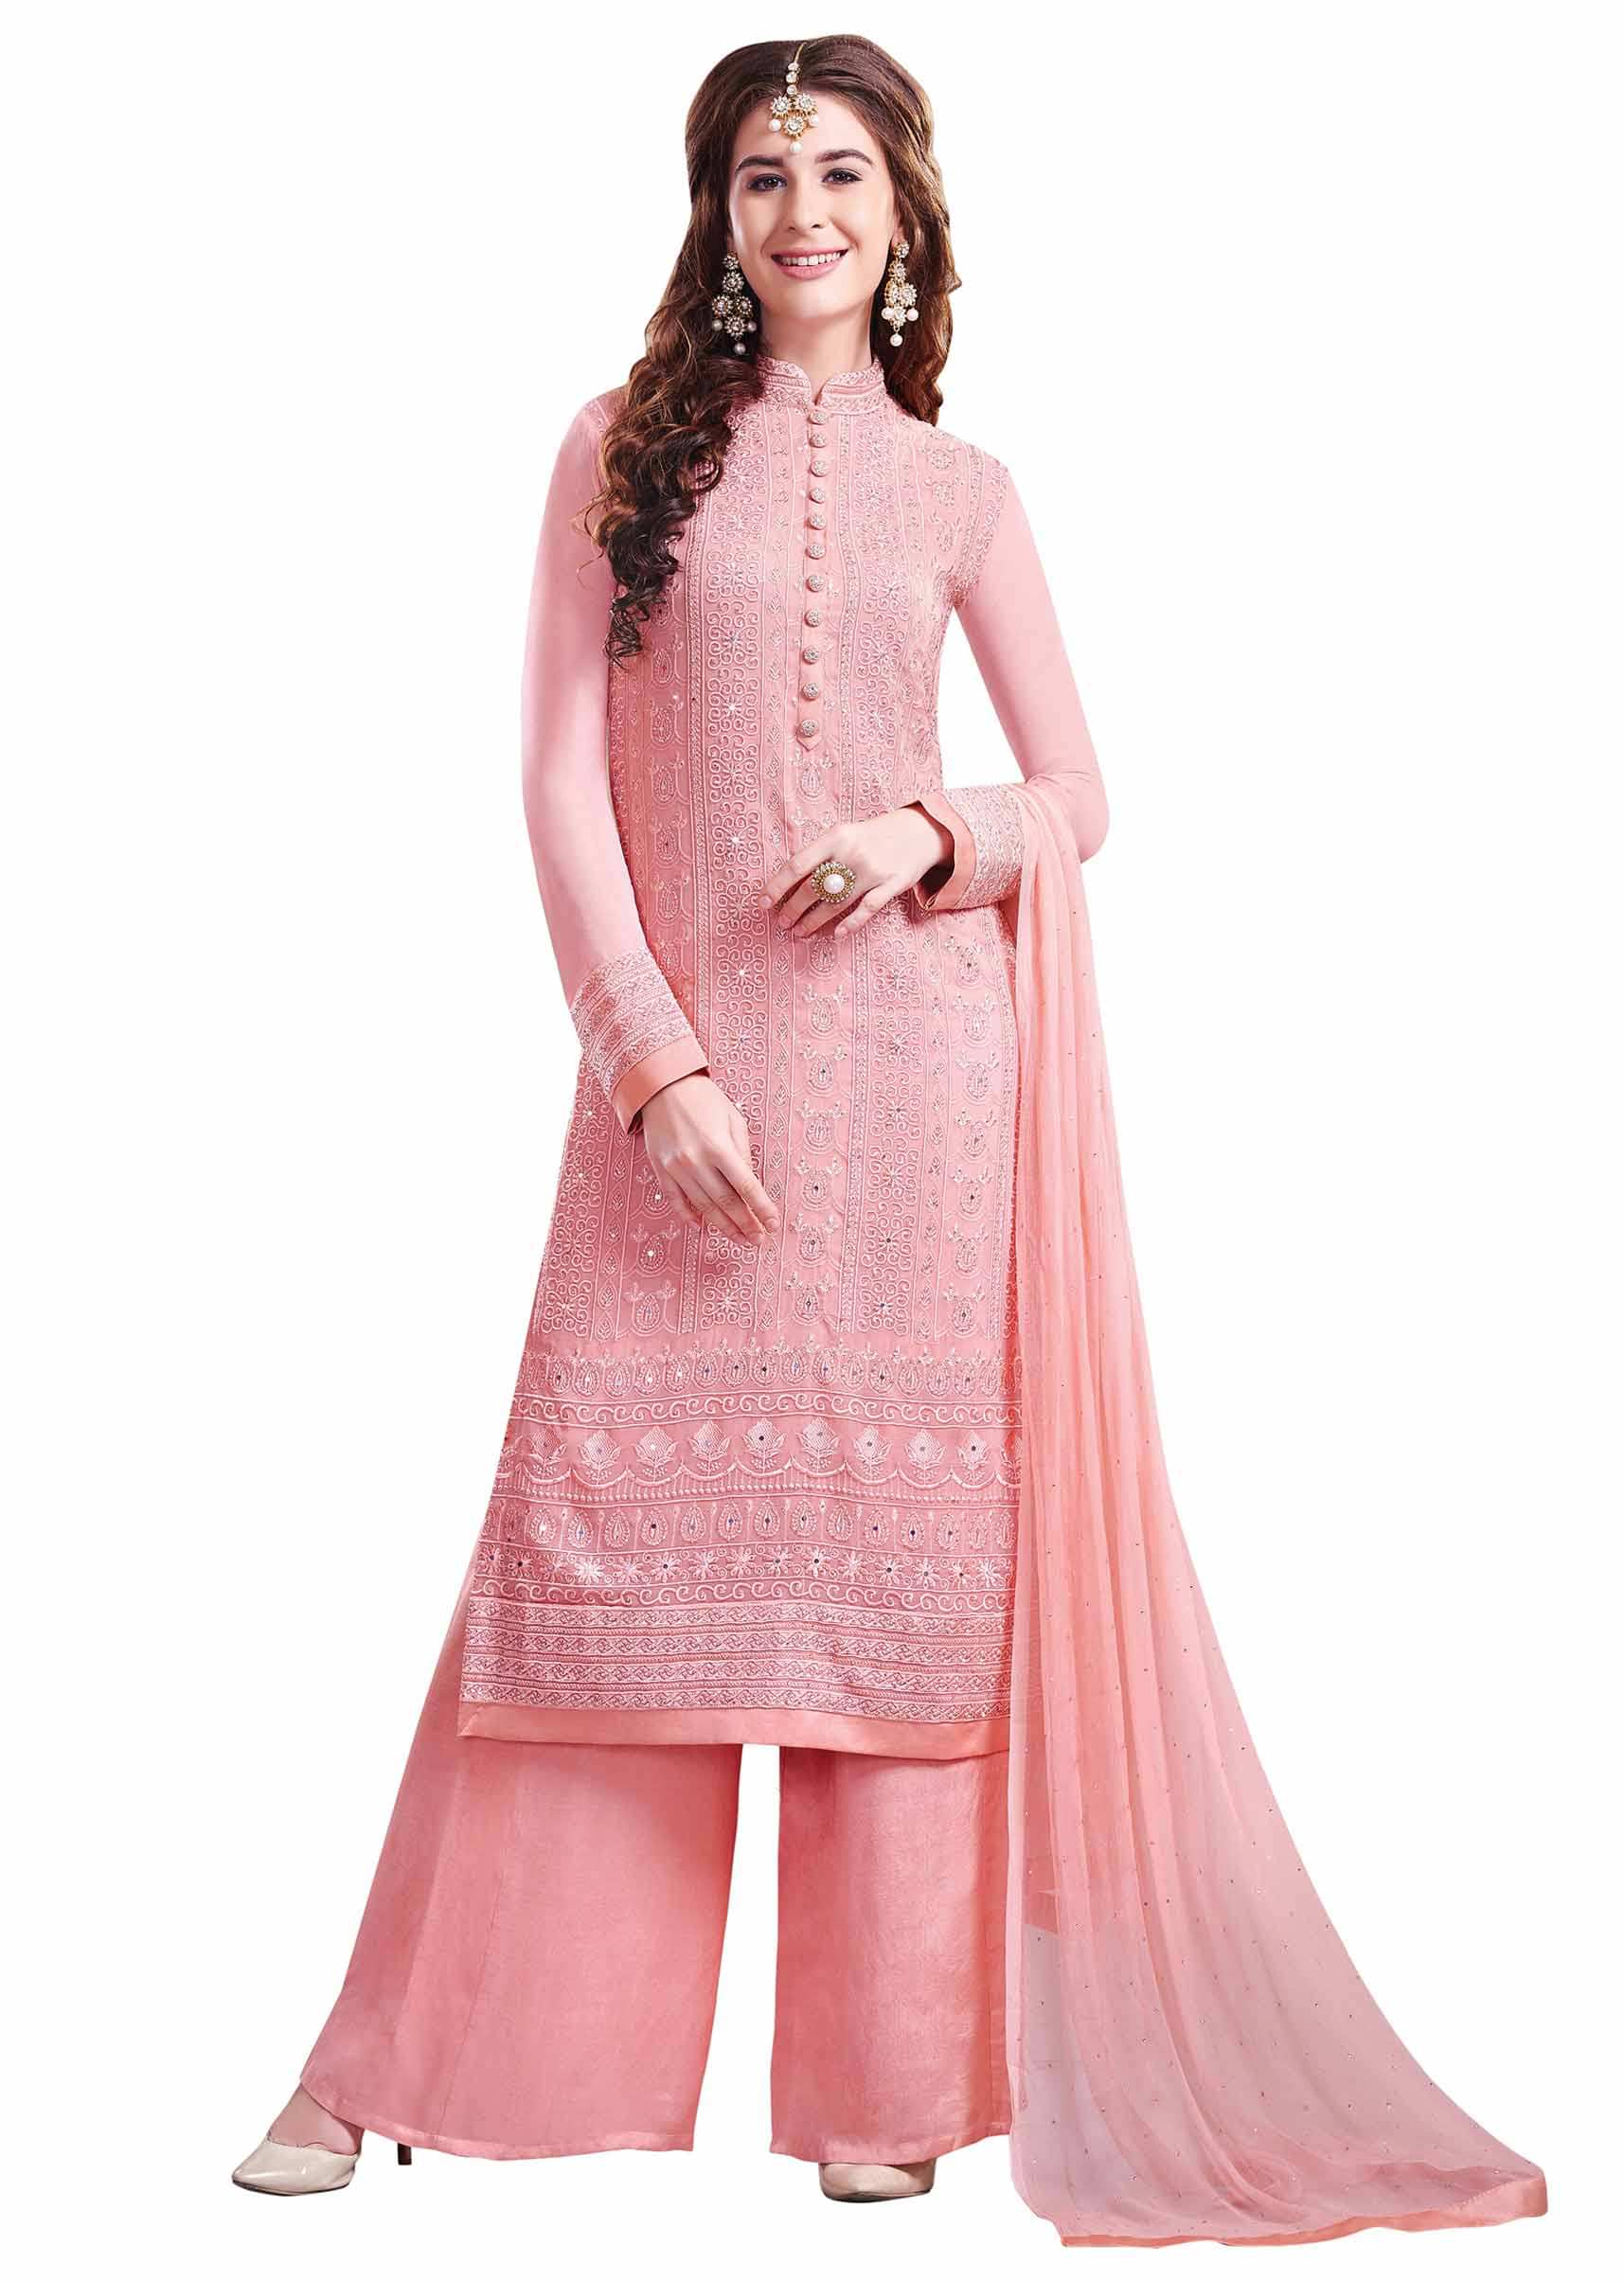 Peach unstitched suit adorn in resham and kundan embroidery